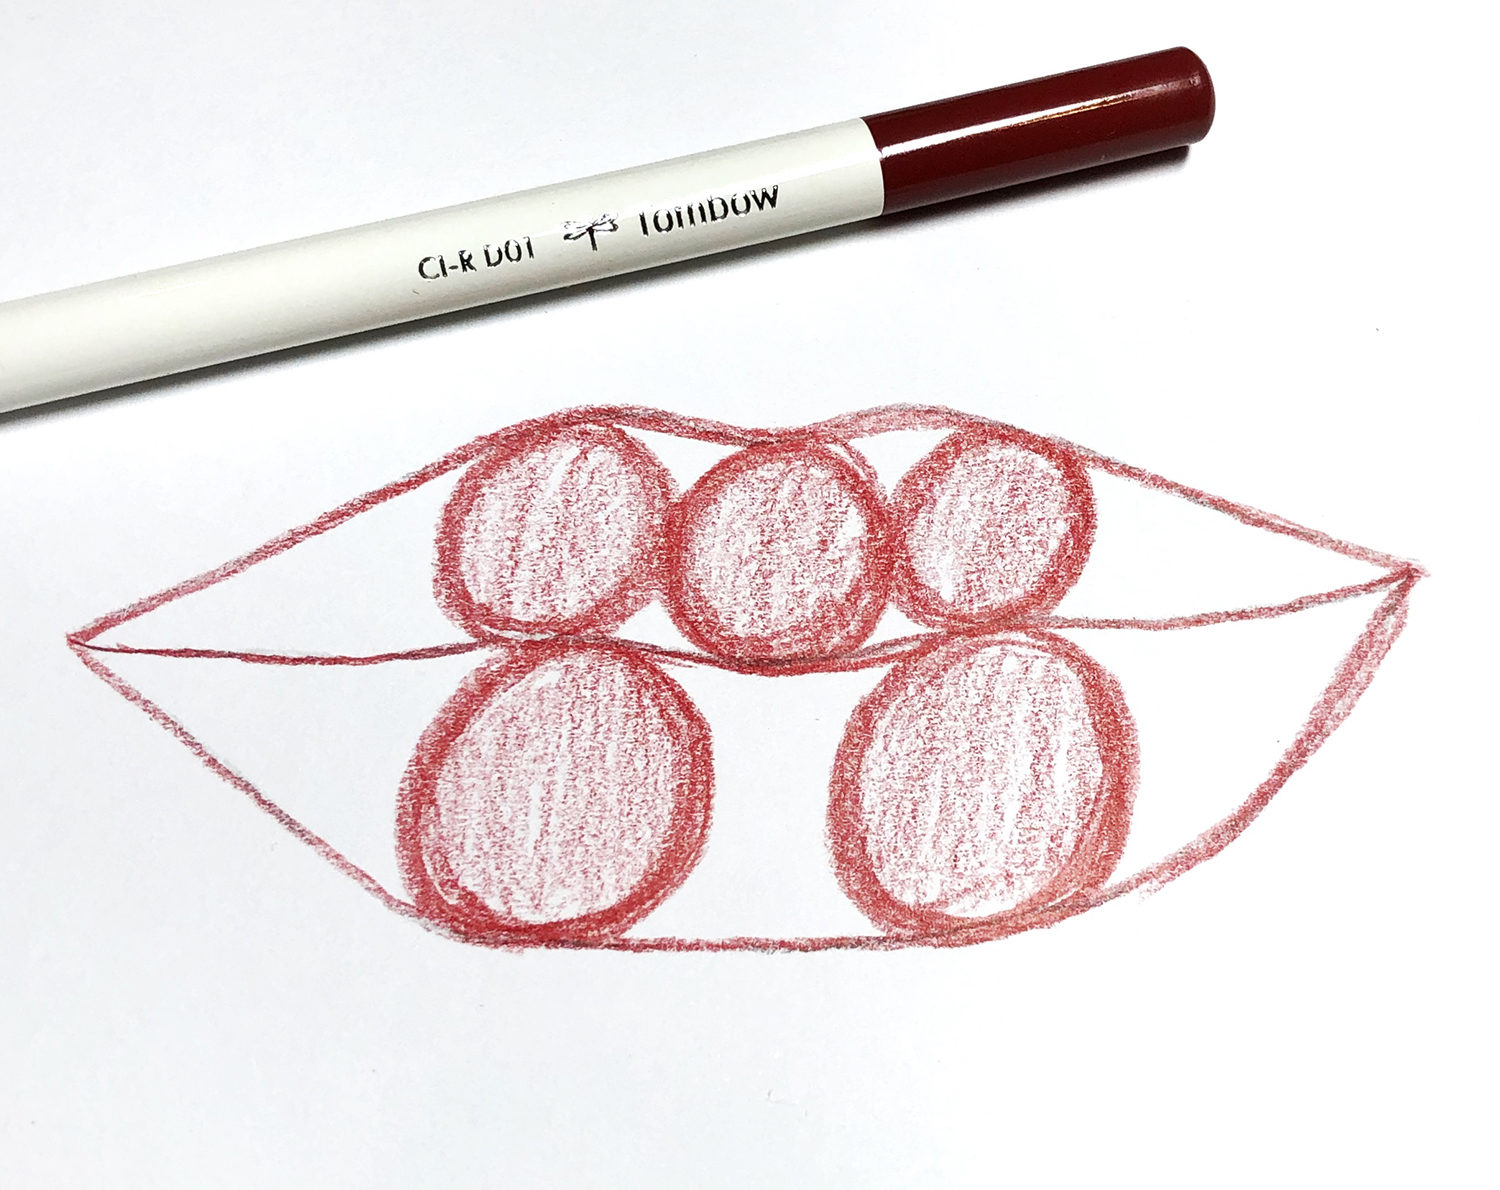 How To Draw Lips Using Irojiten Colored Pencils Tombow Usa Blog There are many ways to draw them, but by just focusing on the flower's basic parts, like the petal, filaments, and anthers, you can easily recreate the basic appearance of a cherry blossom. tombow usa blog